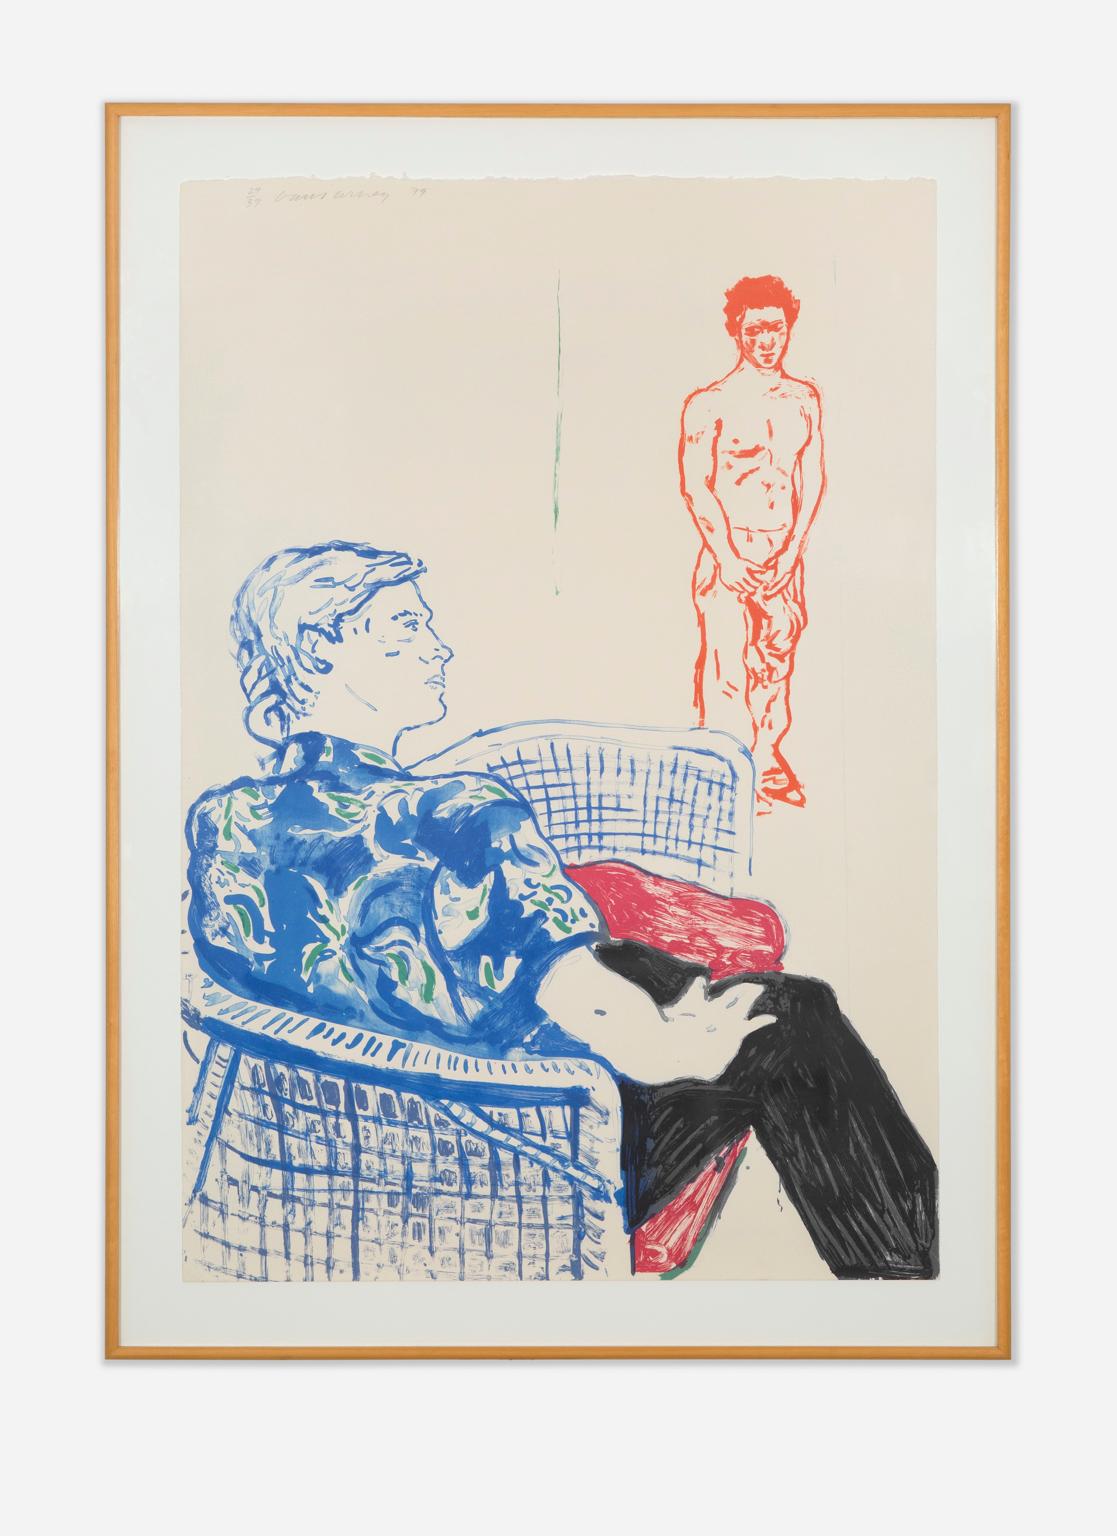 David Hockney Figurative Print - "Joe With David Harte", Lithograph, Signed and Numbered by Artist